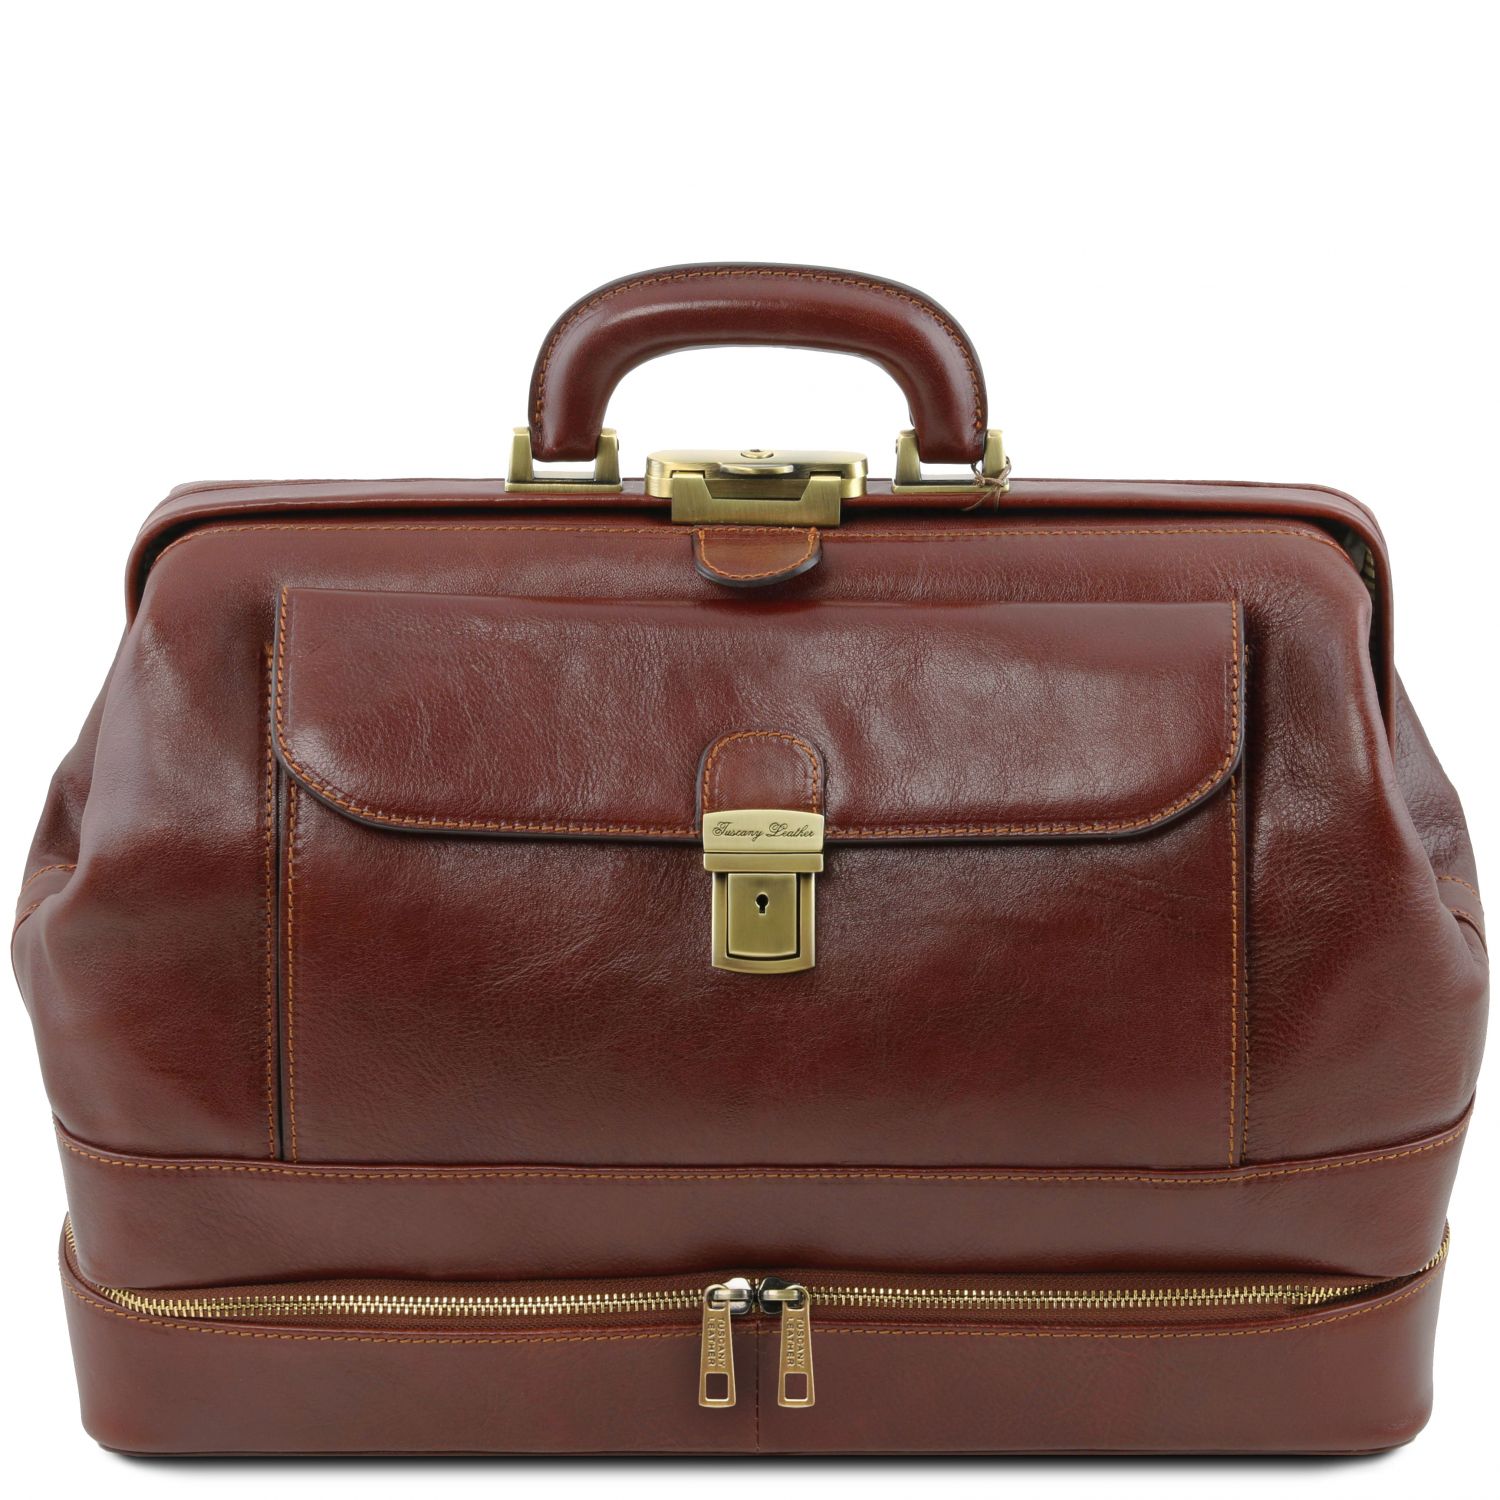 Shoulder Strap and Double Bottom Exclusive Doctor Bag in Genuine Leather Made in Italy